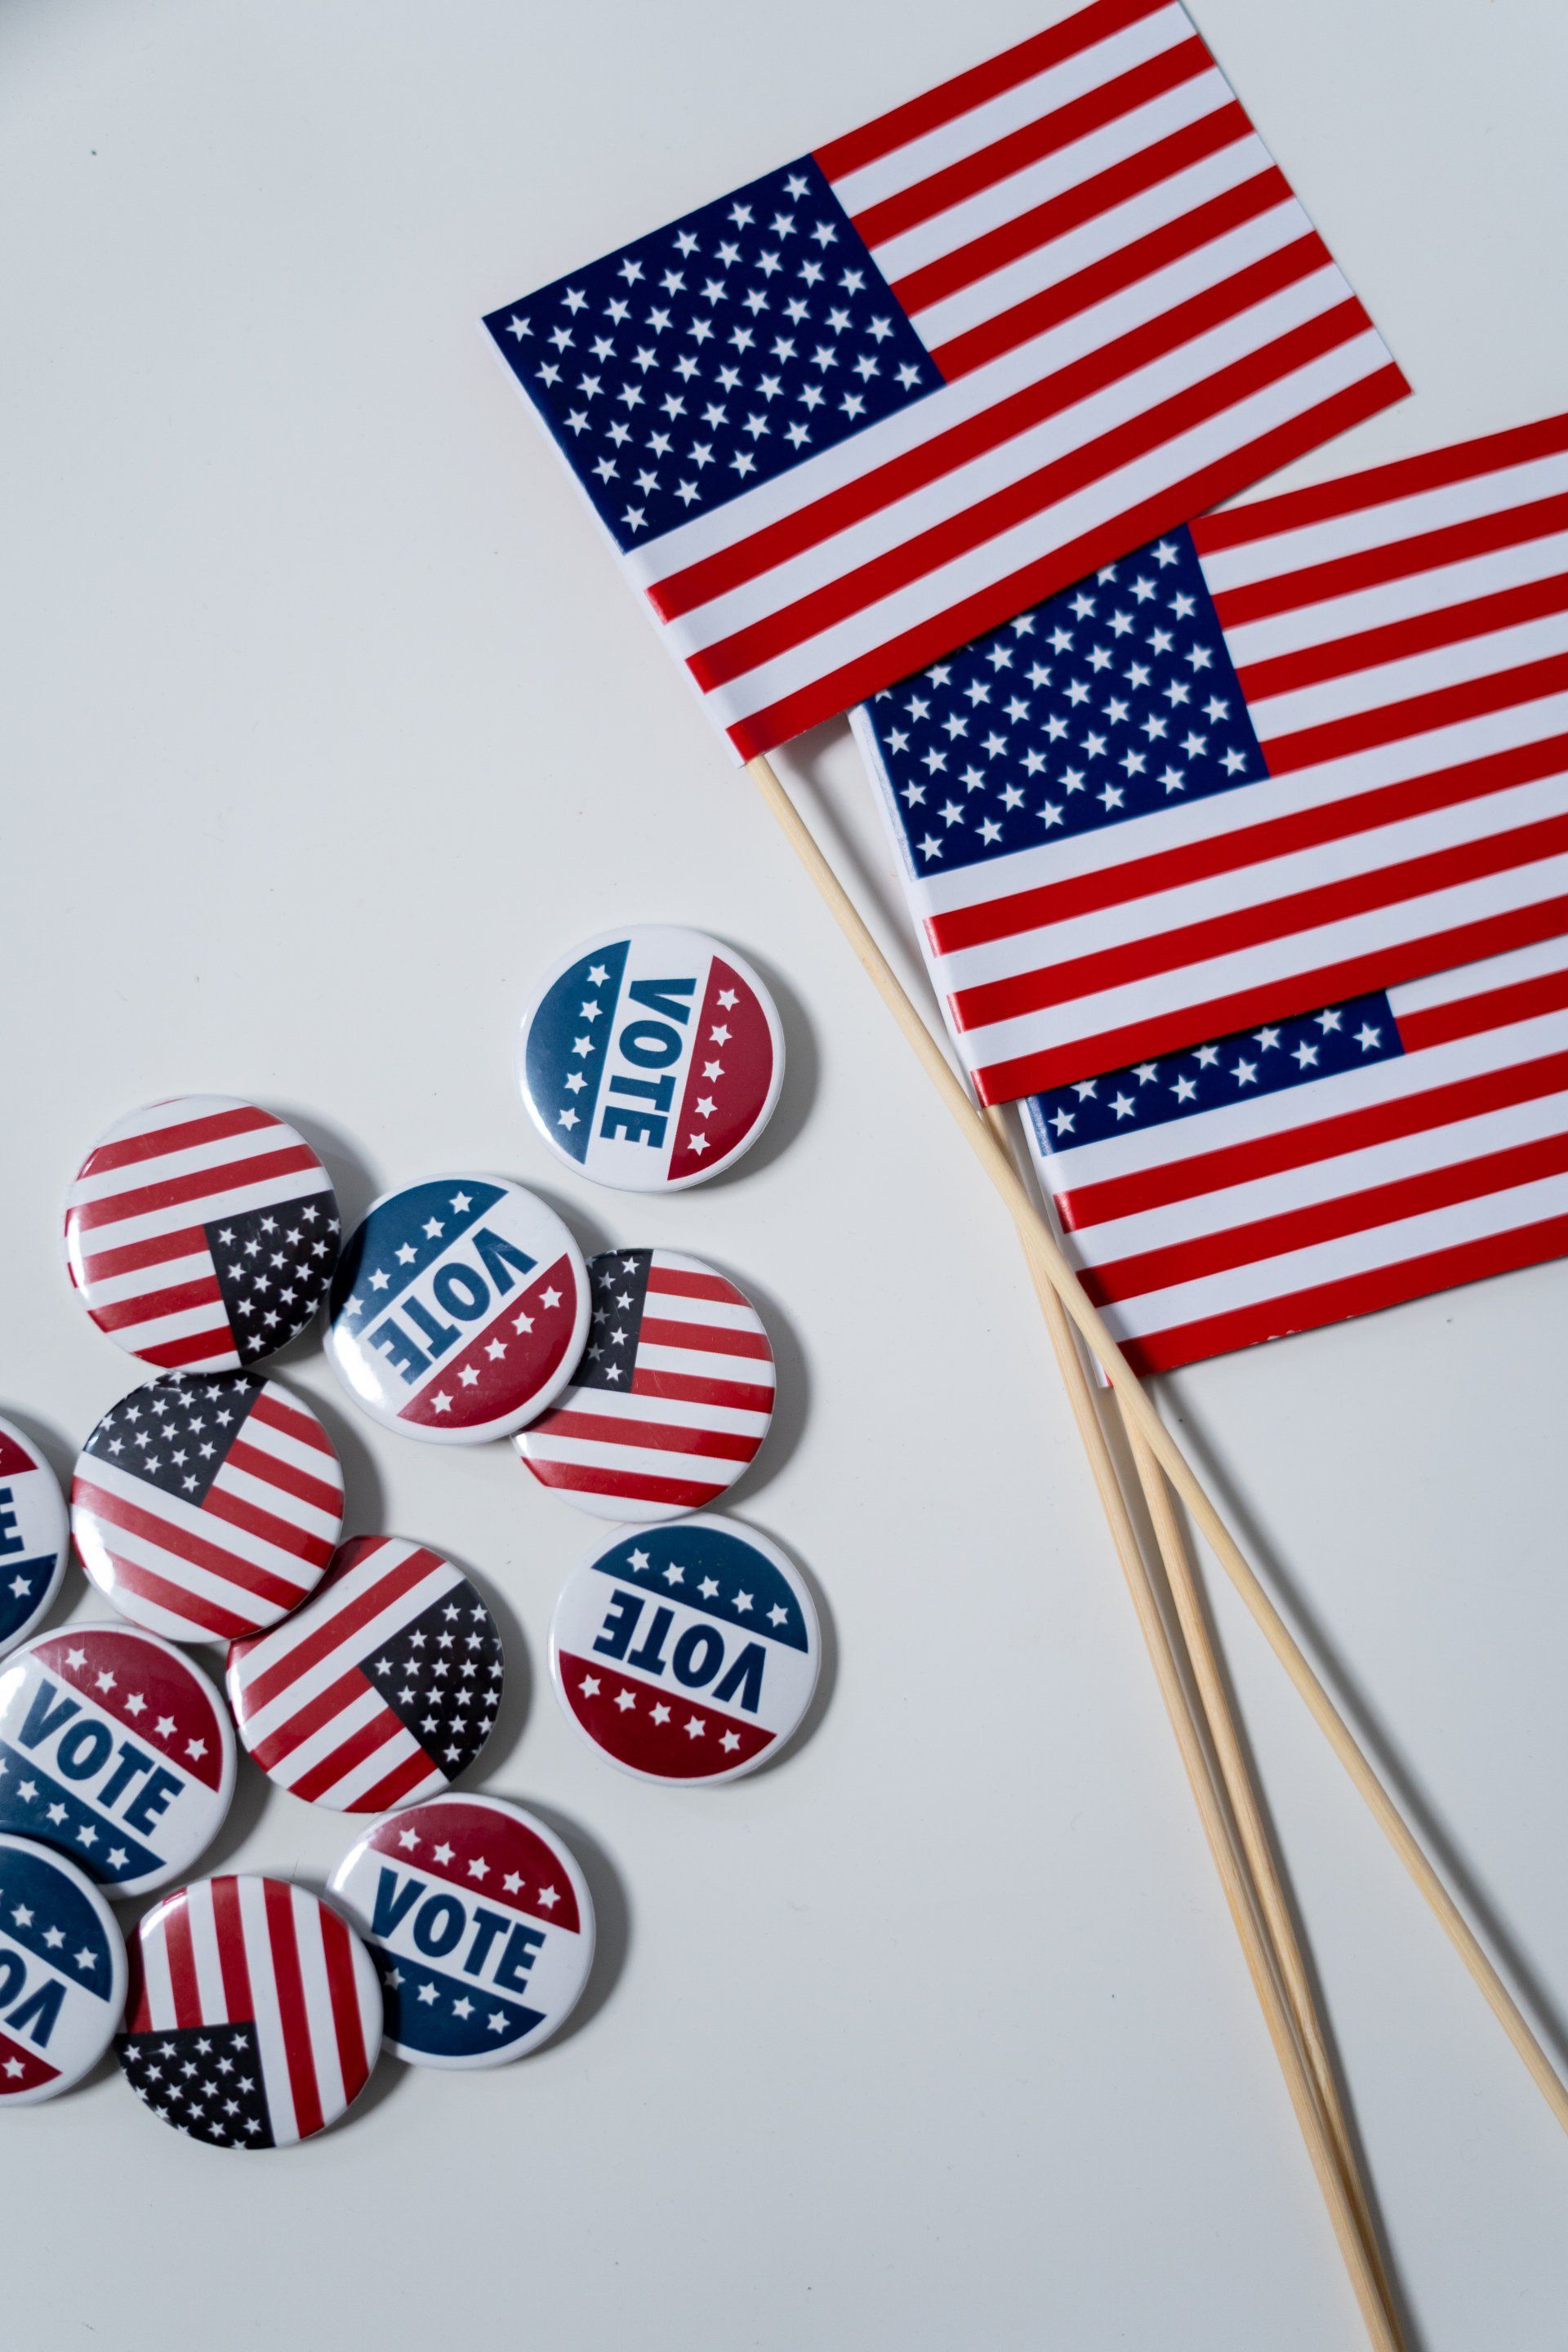 USA flags and USA voting  shirt pins lying on white surface